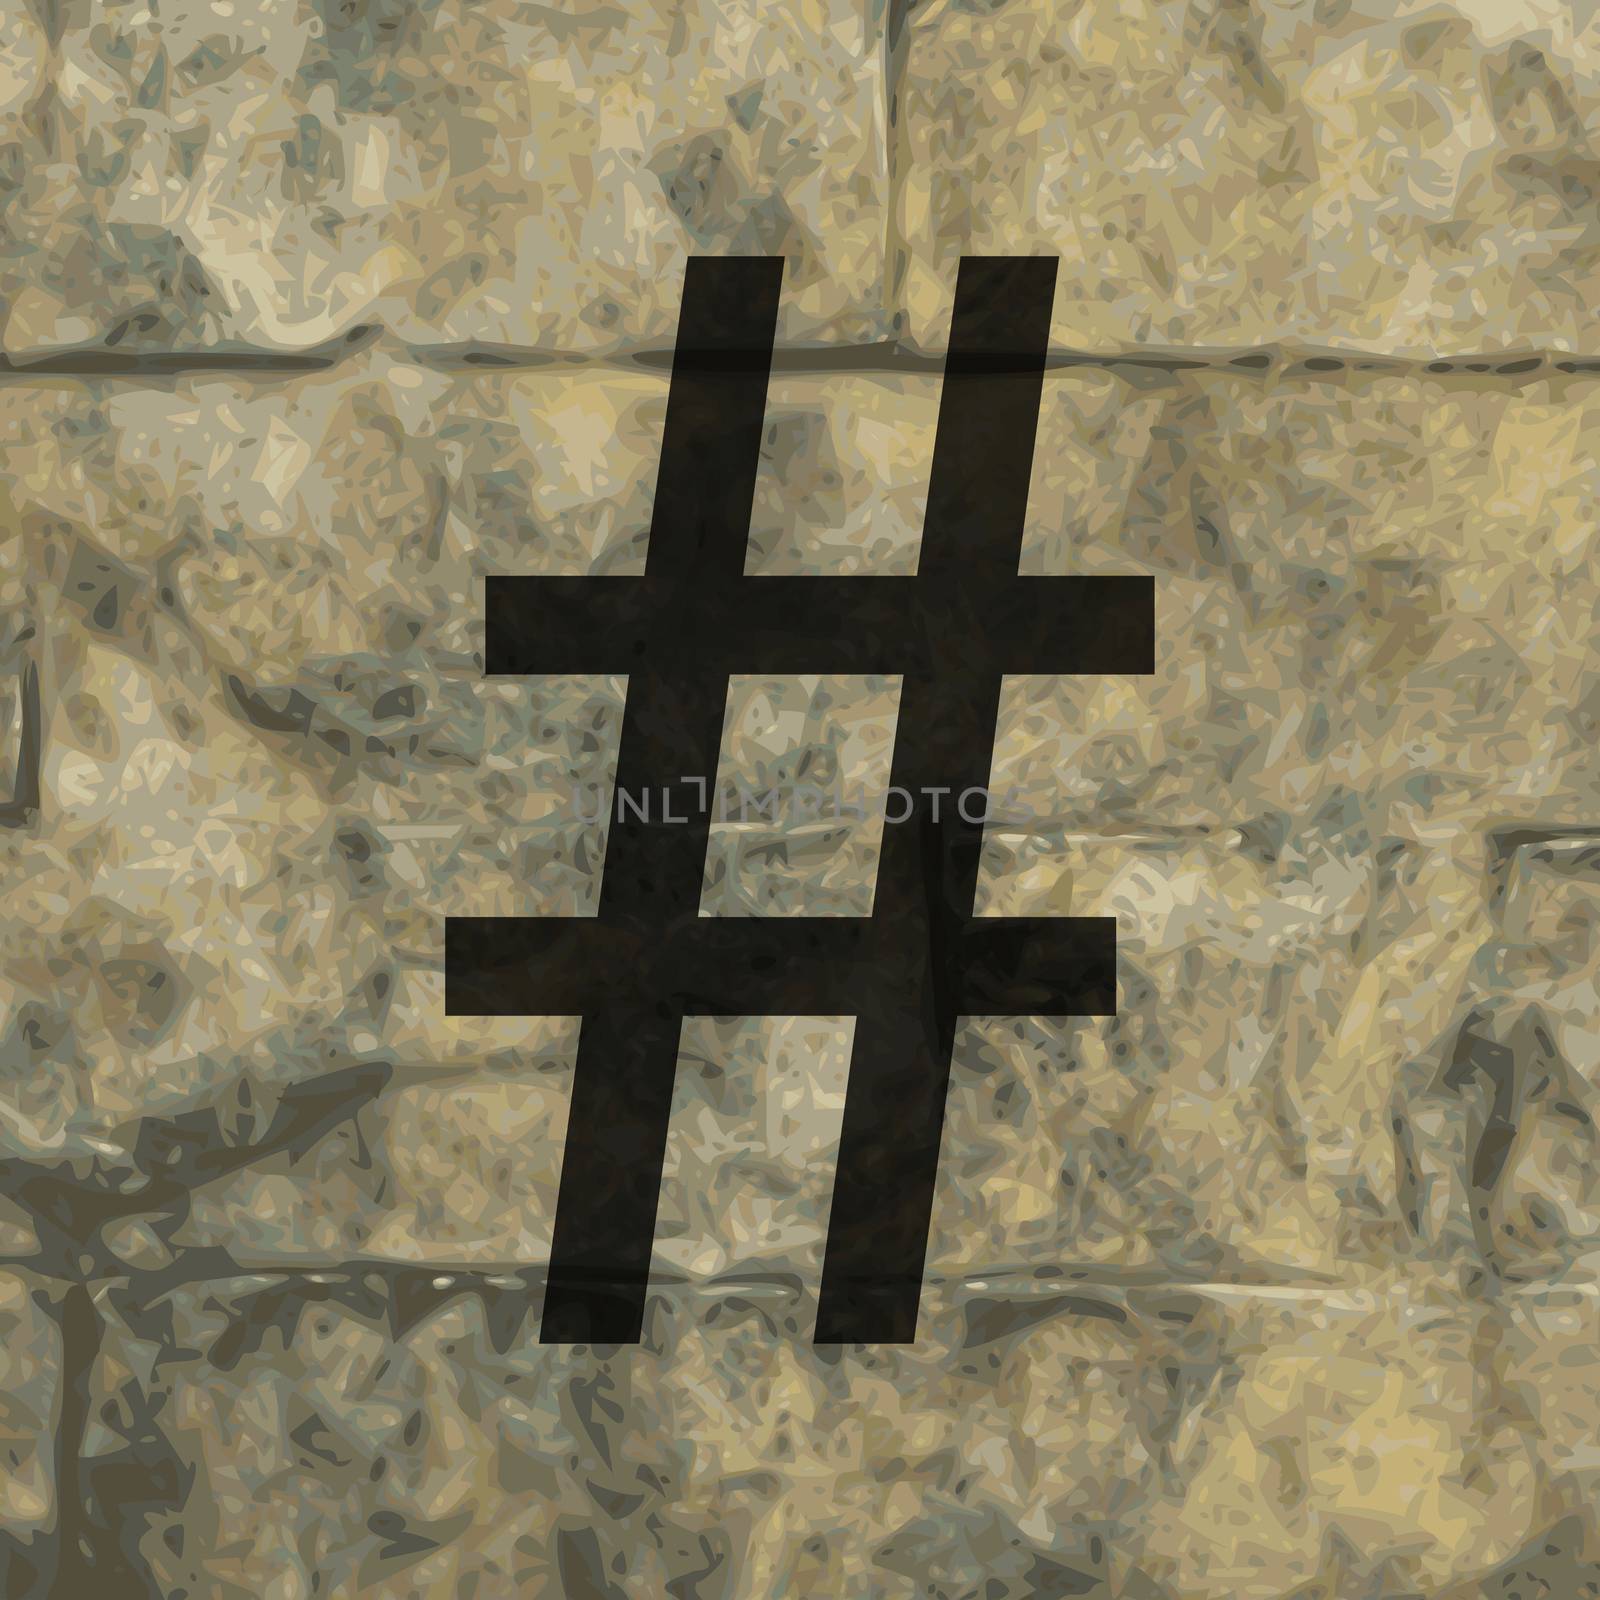 Hashtag Speech icon Flat with abstract background.